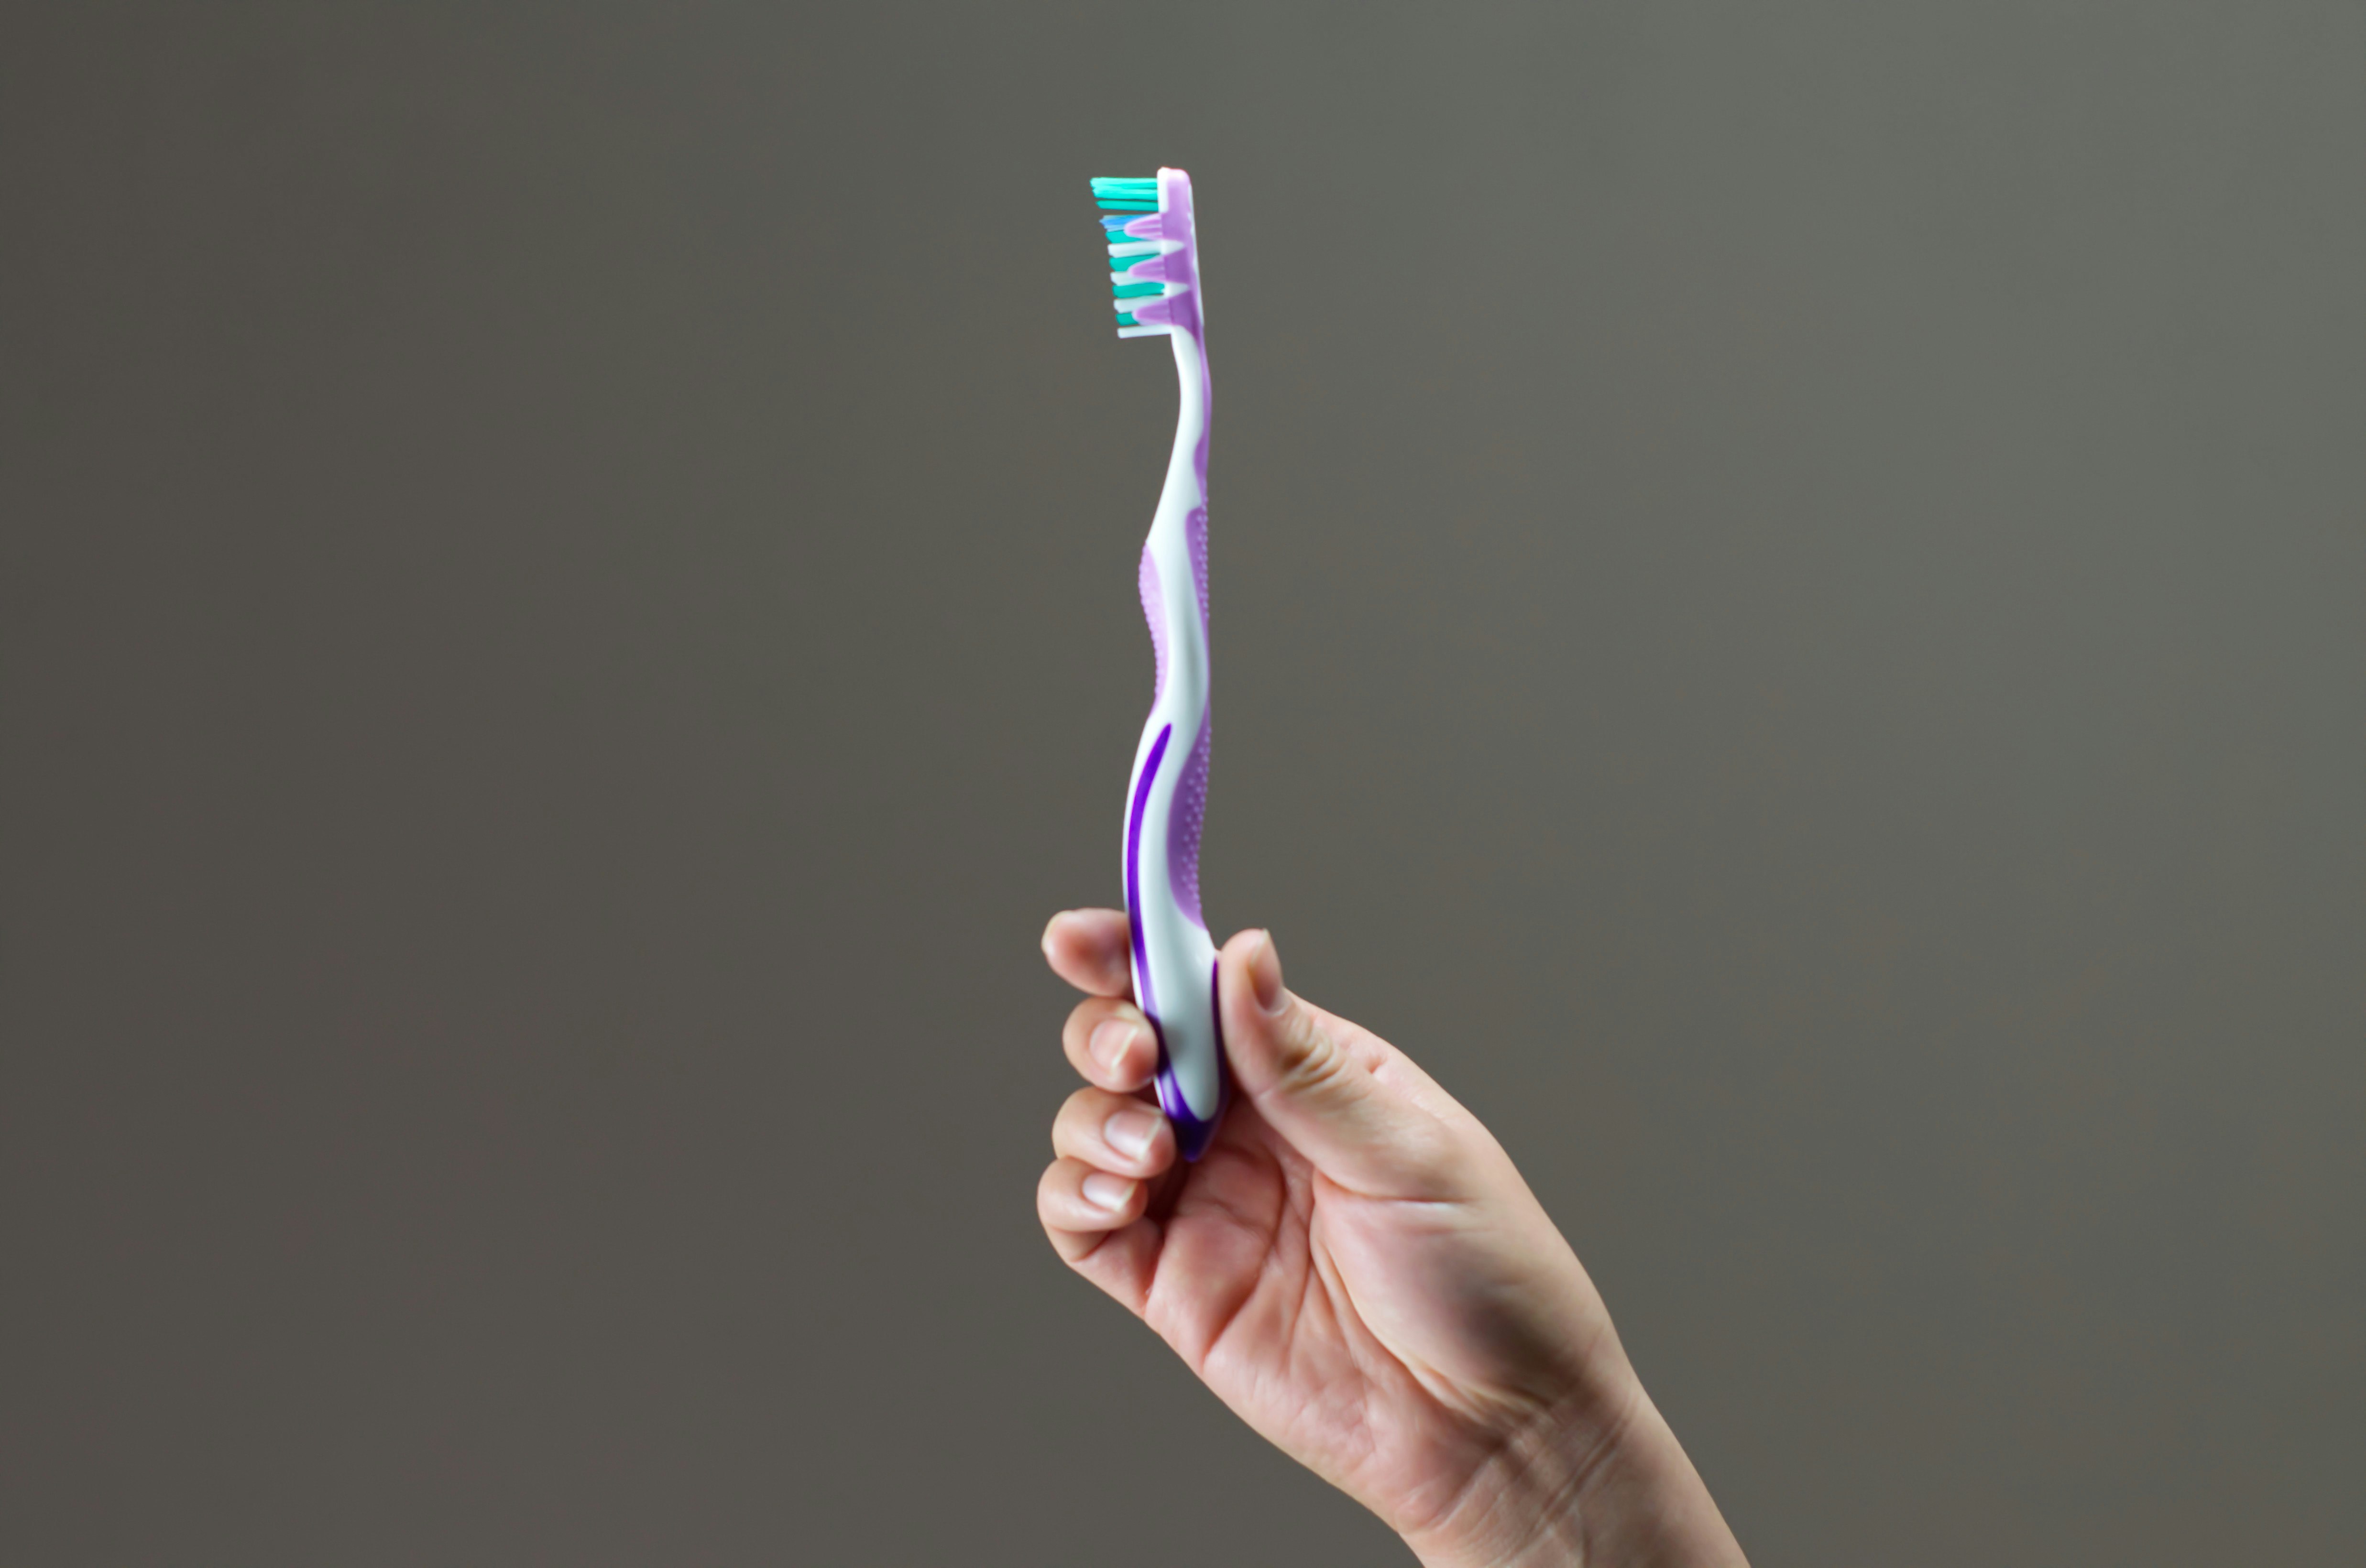 Zero Waste Toothbrush/></p>
<p> </p>
<h2>Ditch Plastic Toothbrush for Bamboo Toothbrushes! </h2>
<p>As one of the fastest-growing plants on the planet, bamboo has an extremely rapid growth rate. Contrary to this, petroleum is a limited resource used to manufacture plastic. Bamboo plants regenerate themselves after harvesting, so deforestation is not a concern. The handle of this toothbrush is made from natural bamboo wood that is 100% biodegradable. If it is to be discarded safely, it can be returned to the ground in compost or a landfill. Although these eco-friendly toothbrushes do not contain compostable bristles, they still reduce plastic use by 90%. </p>
<p>Bamboo is eco-friendly. The bamboo used for wood toothbrushes does not require large, expensive machinery for cutting and collecting since bamboo is hand-cut to protect bamboo forests. Moreover, many<strong> </strong>wood toothbrushes can be recycled once their useful lifetime has passed. Their environmental friendliness makes them a good choice.</p>
<p>There are many <strong>bamboo toothbrush benefits</strong>, such as:</p>
<ul>
<li>Bamboo wood toothbrushes usually have handcrafted handles that use minimal electronic machinery. In contrast, plastic toothbrushes are created in factories that use a lot of machines and automated processes to manufacture the final product.</li>
<li>There are no dyes, inks, or chemicals in the toothbrushes.</li>
<li>Bamboo is sturdy and durable</li>
<li>It is hygienic and safe to use toothbrushes made of bamboo wood. </li>
<li>They also have natural antimicrobial properties.</li>
</ul>
<p><img src=